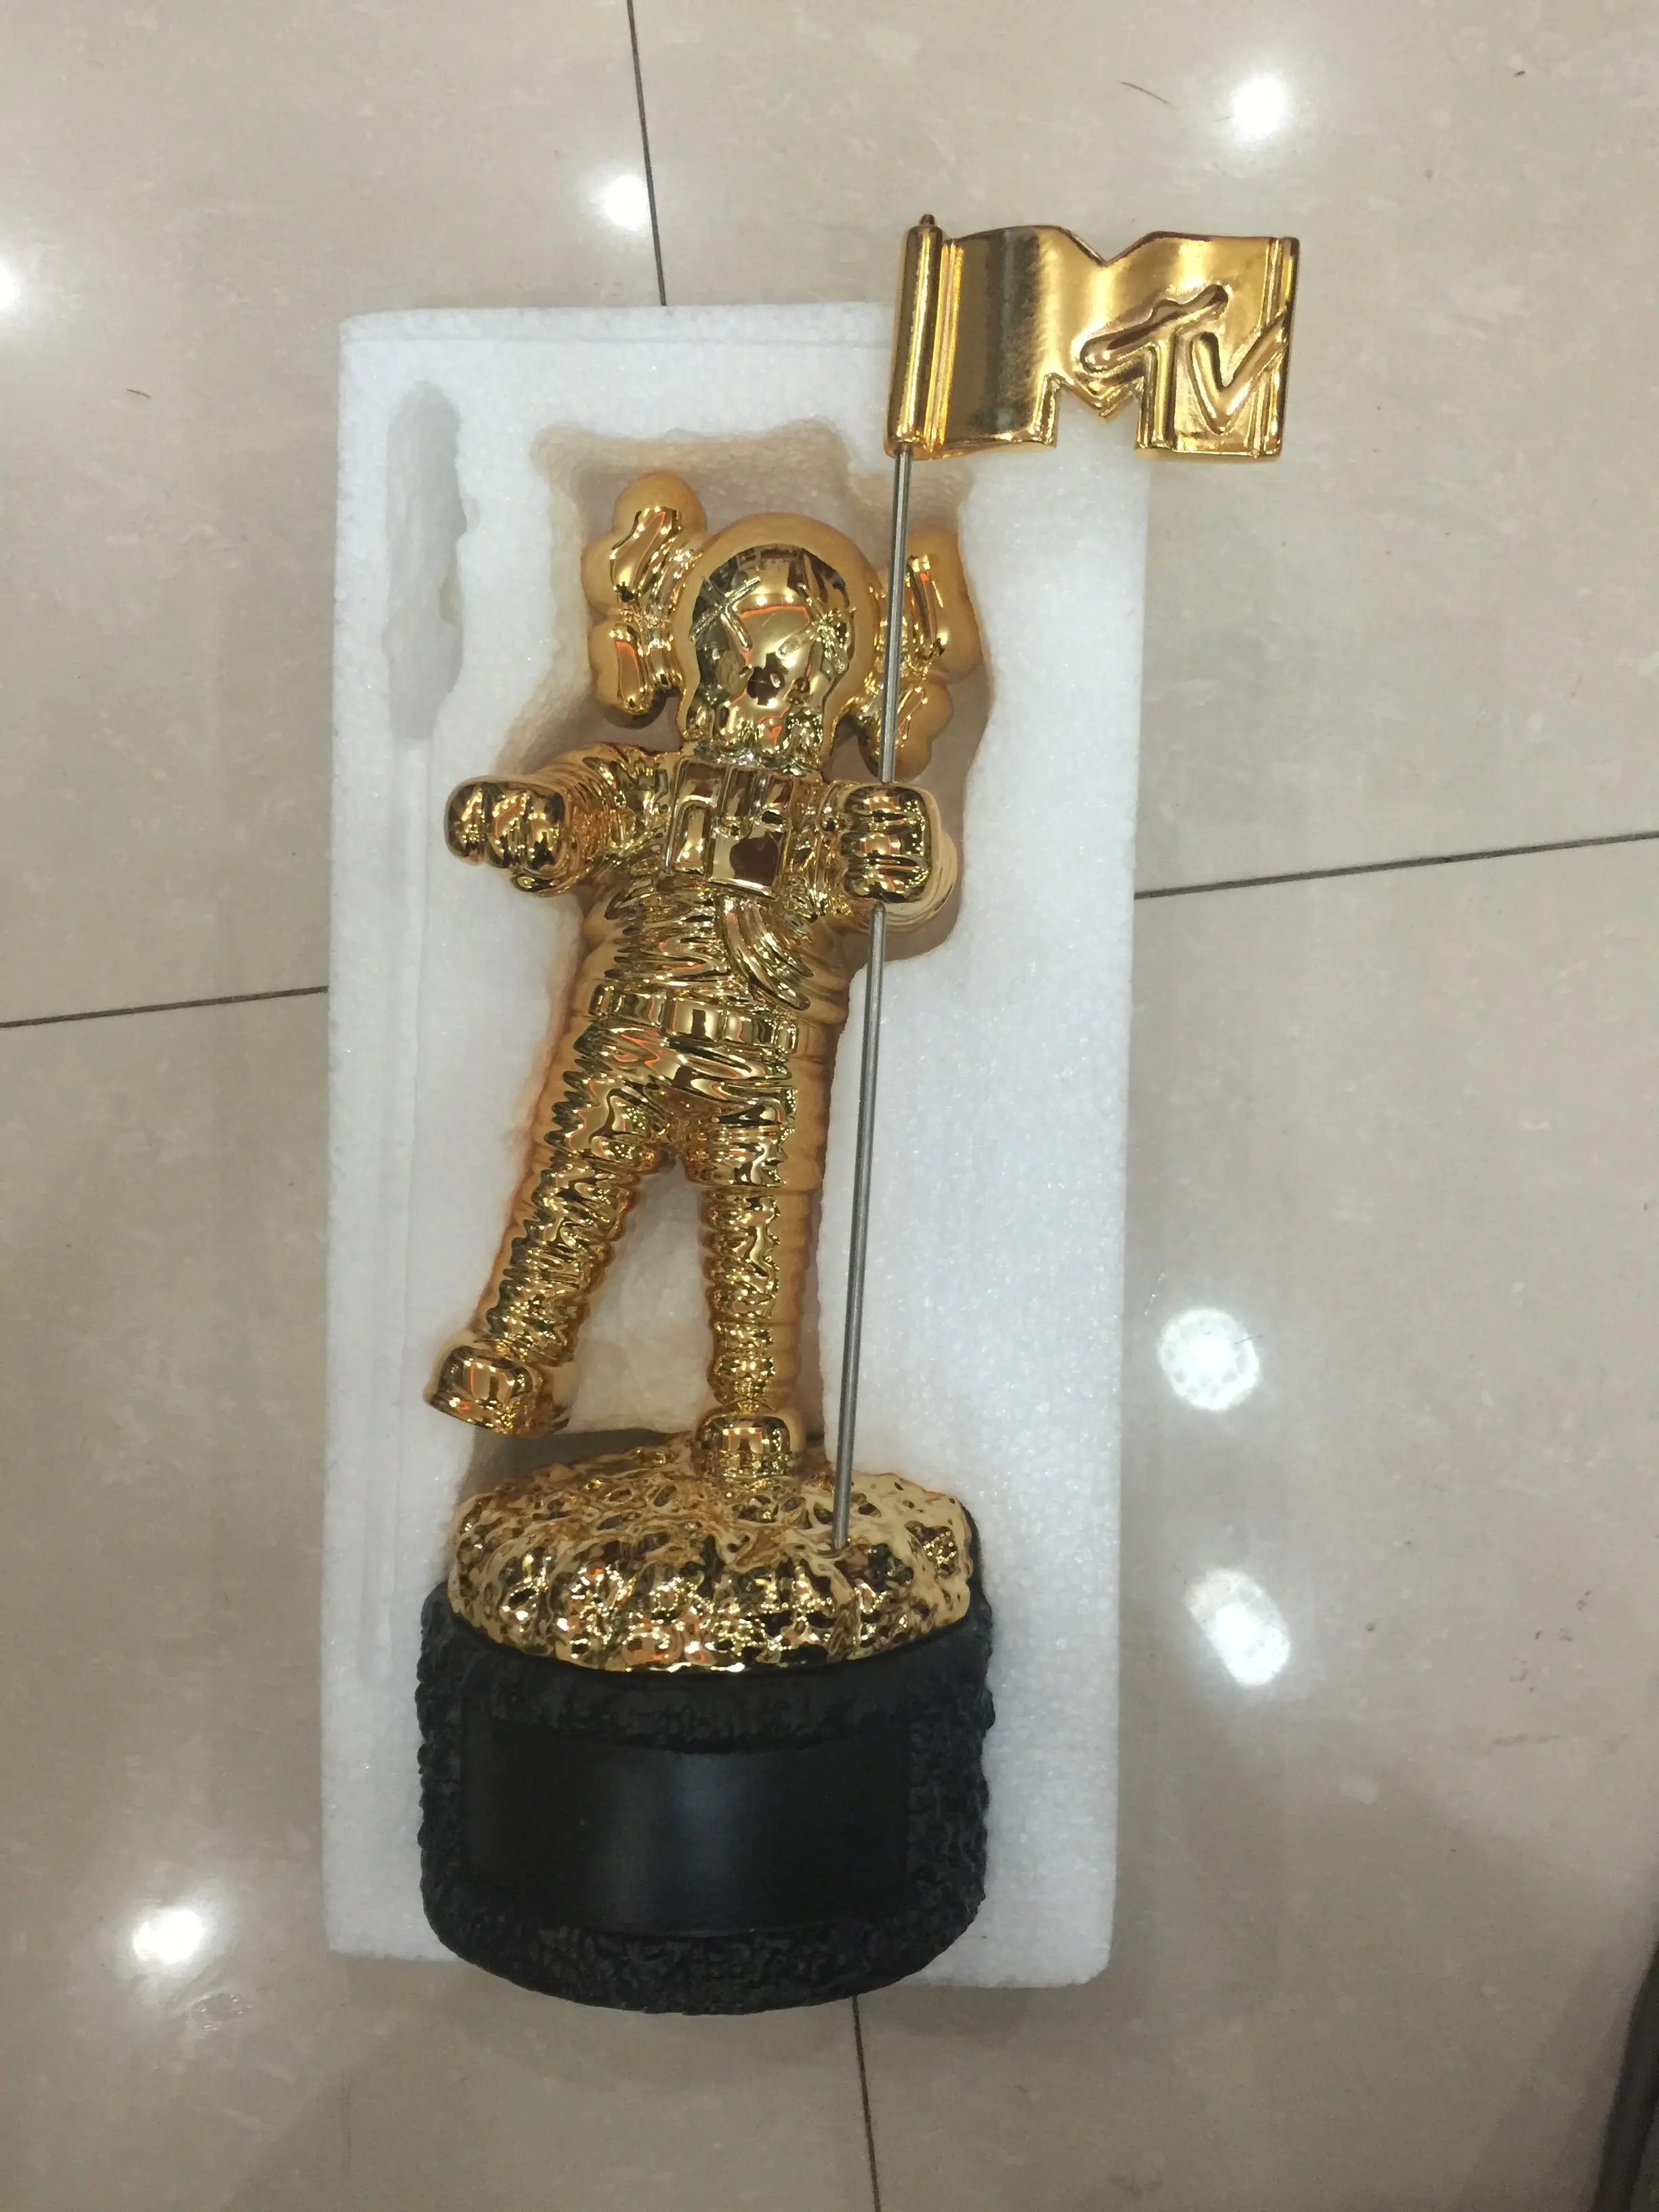 2020 Gold MTV Awards American MTV Awards, Moonman Award Trophy Replica Statue Moonman Prop HIGH QUALITY SILVER PLATED 1.1kg